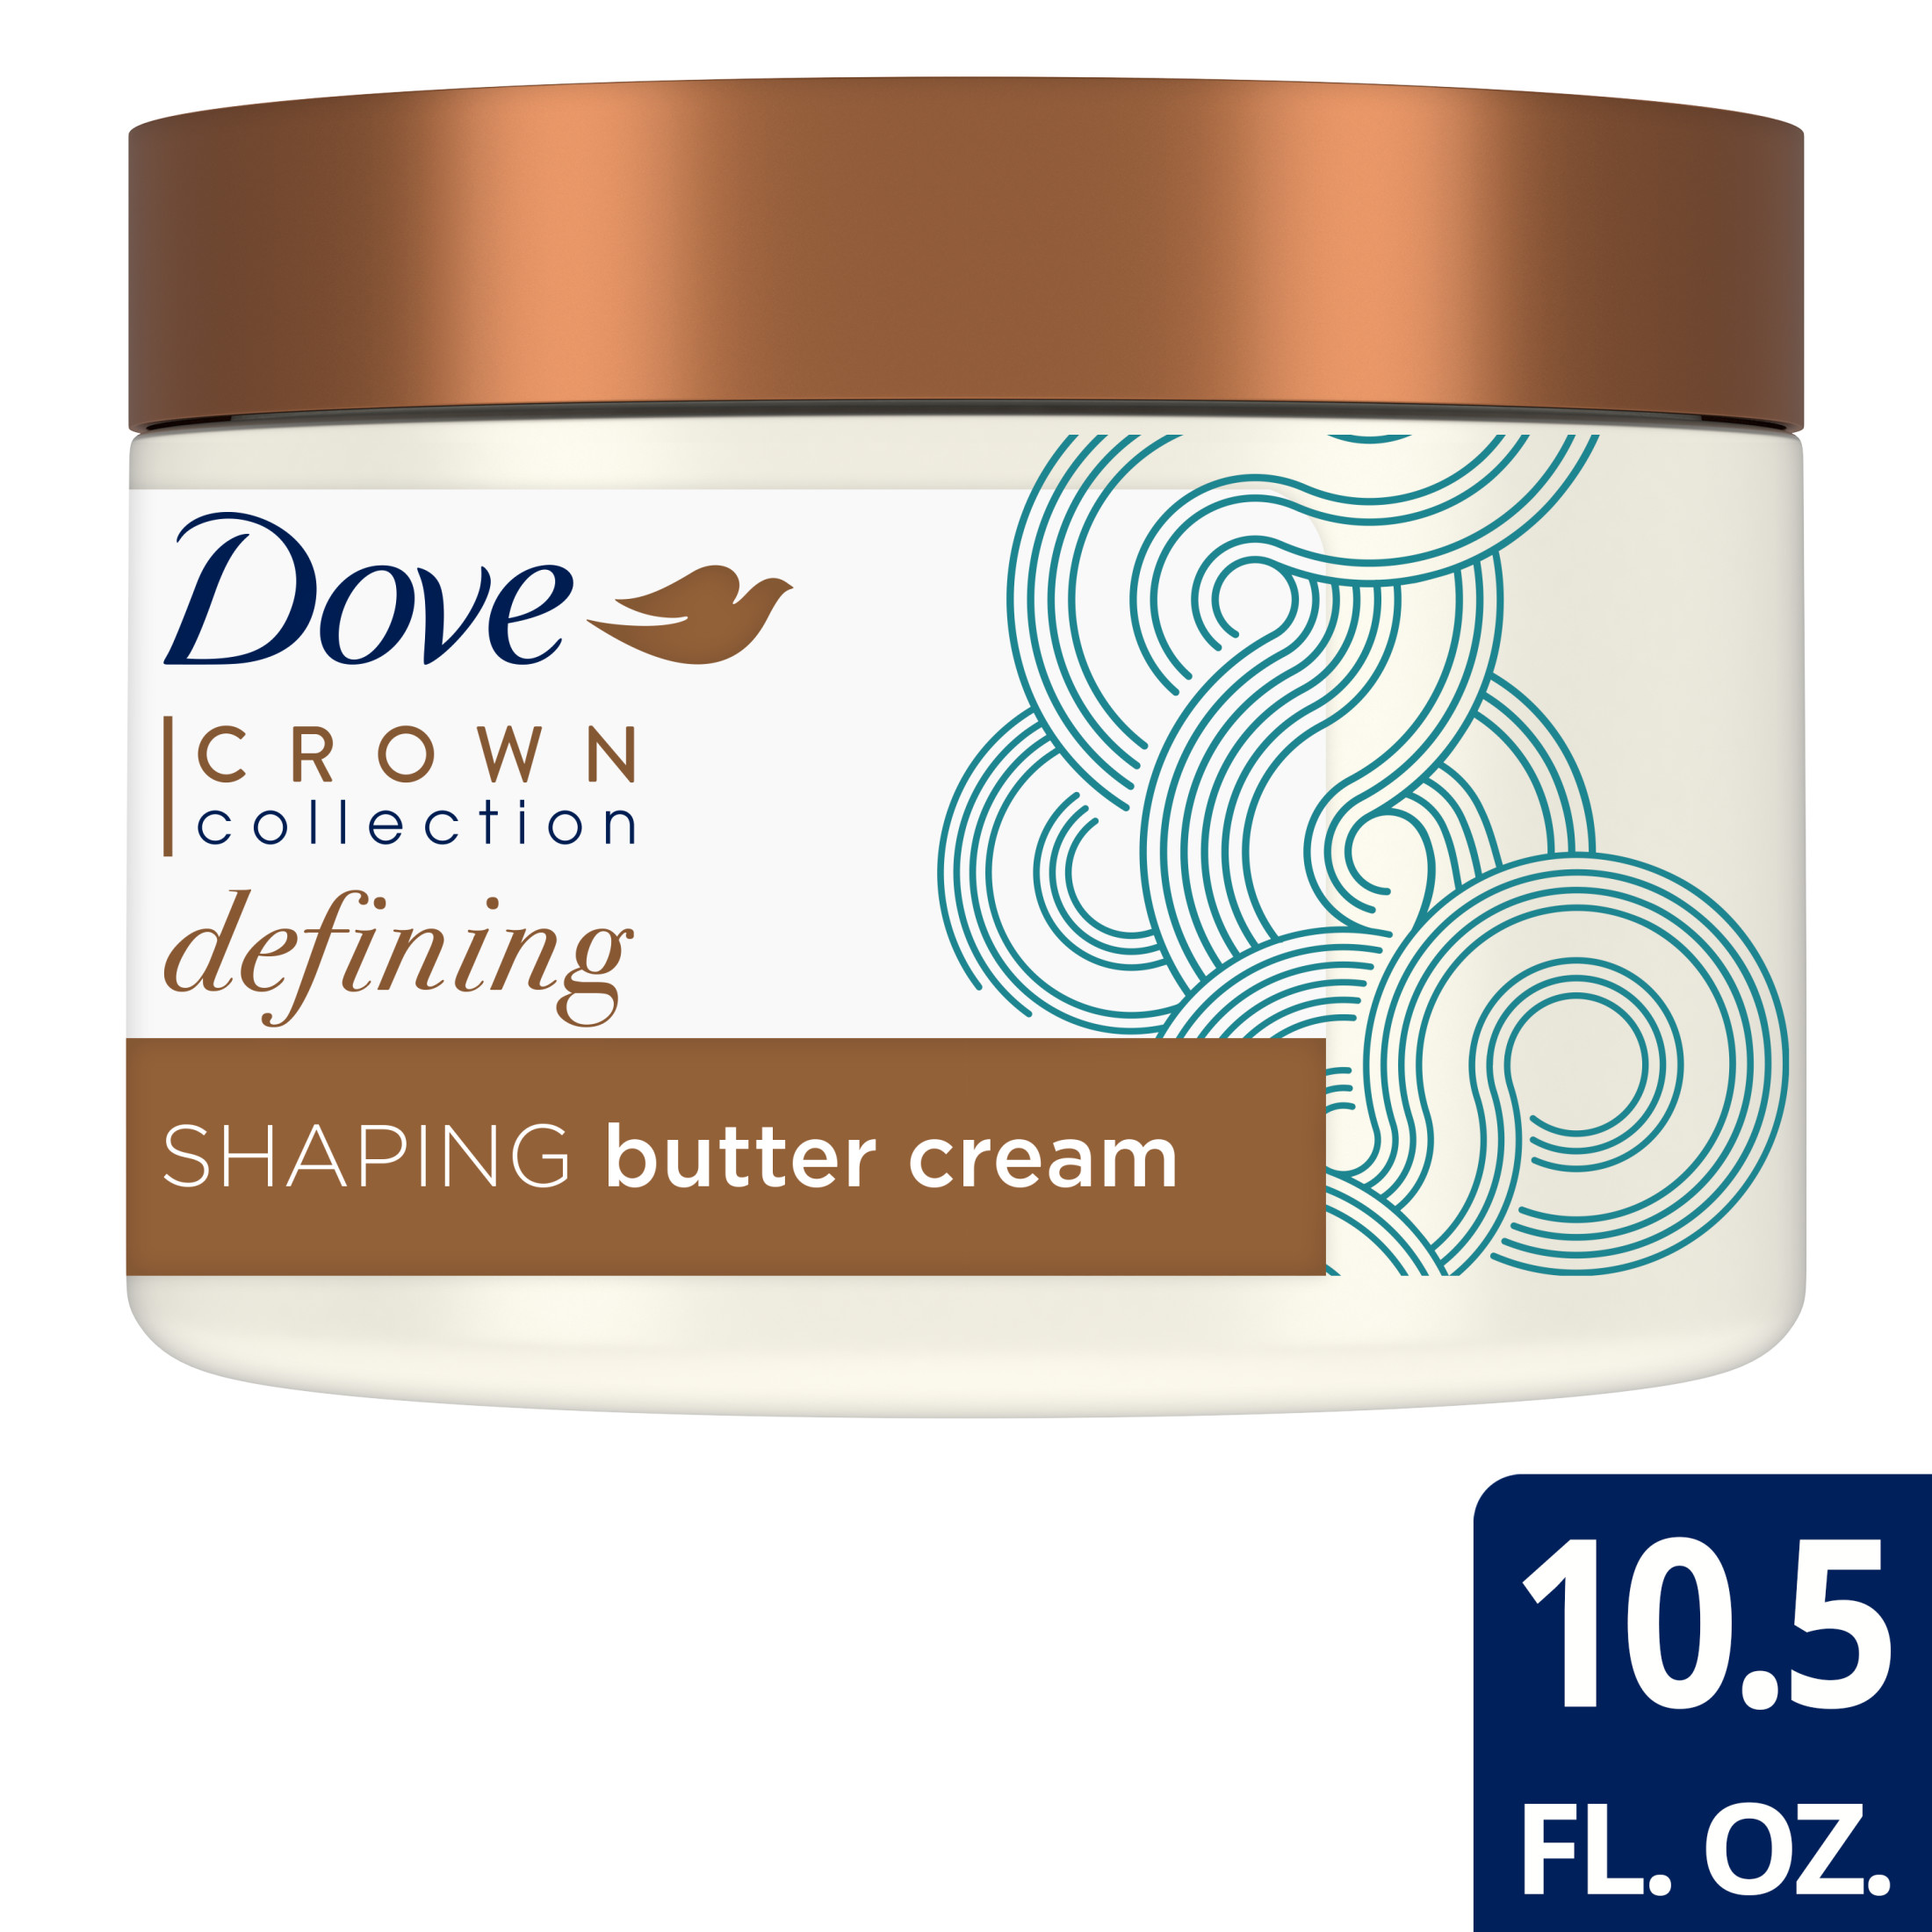 Dove Crown Collection Curl Enhancing Butter Cream Curly Hair, 10.5 oz - image 3 of 12